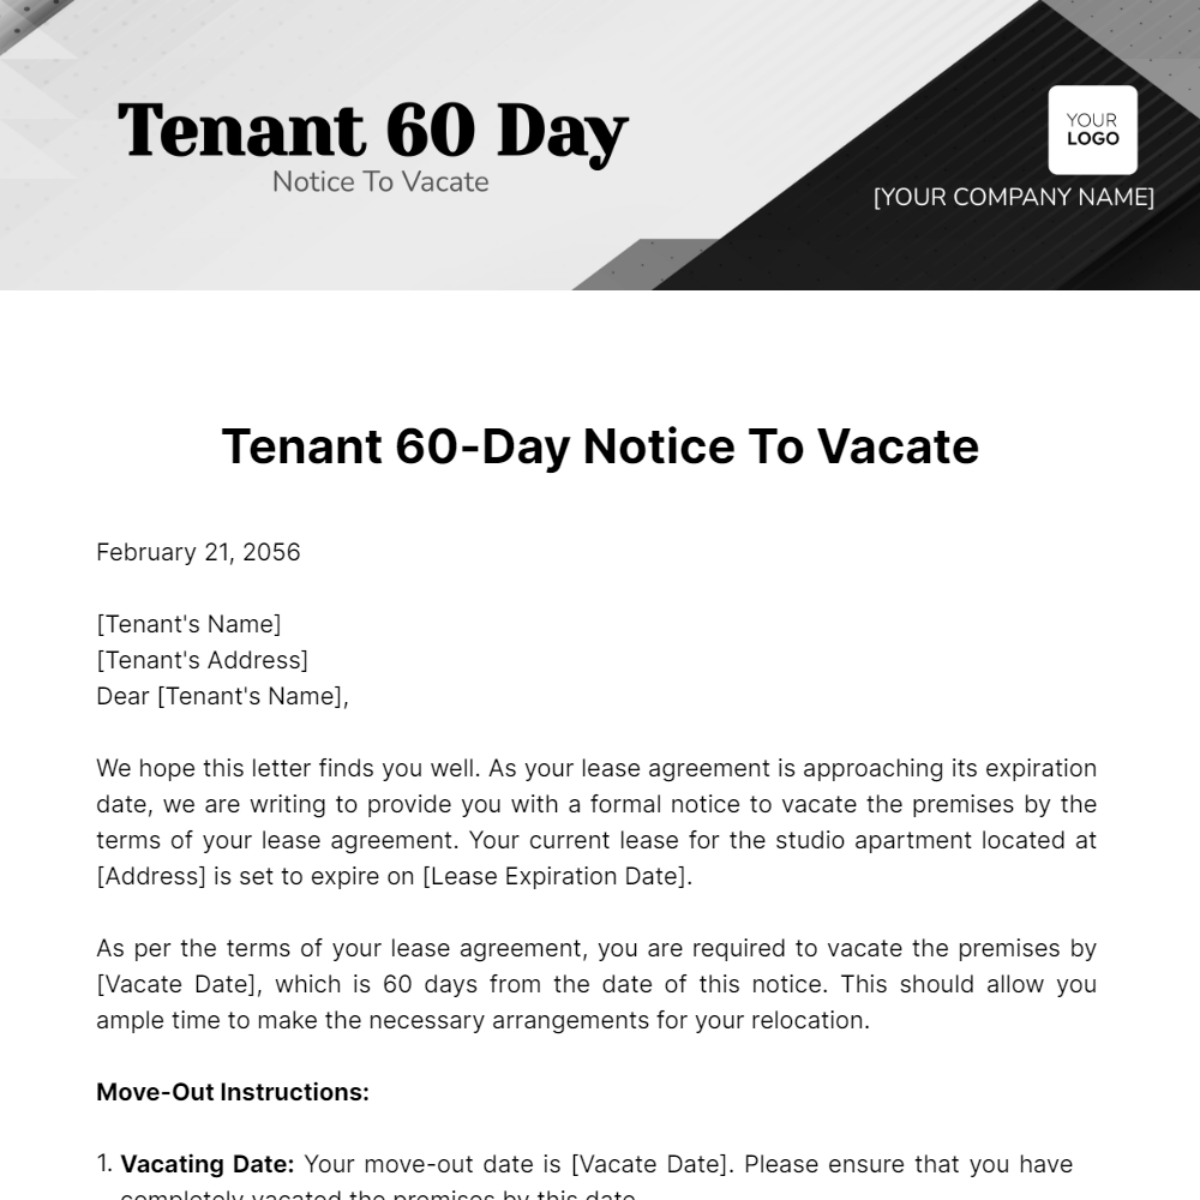 Free Tenant 60 Day Notice To Vacate Template